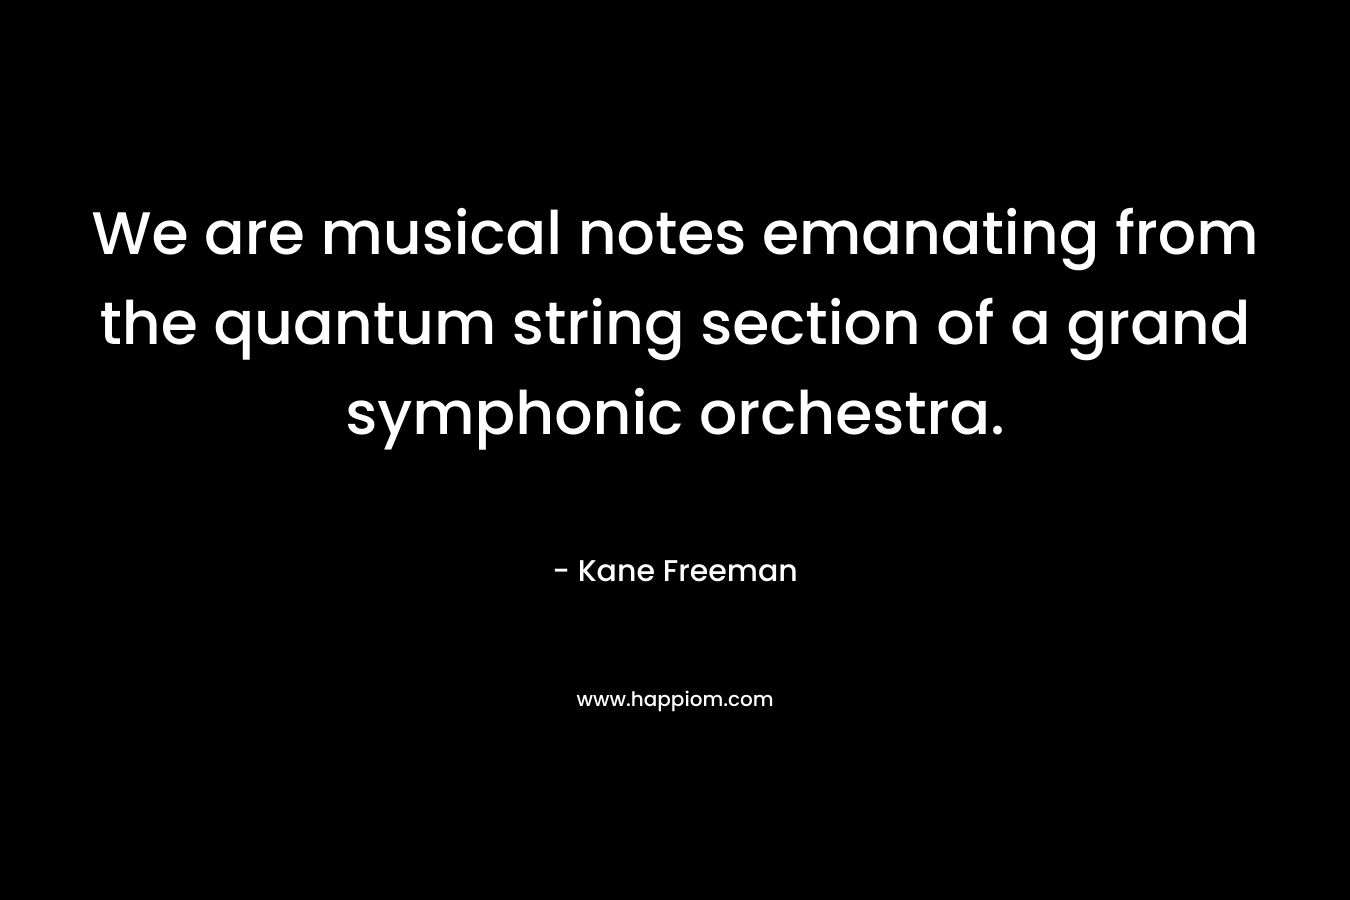 We are musical notes emanating from the quantum string section of a grand symphonic orchestra.